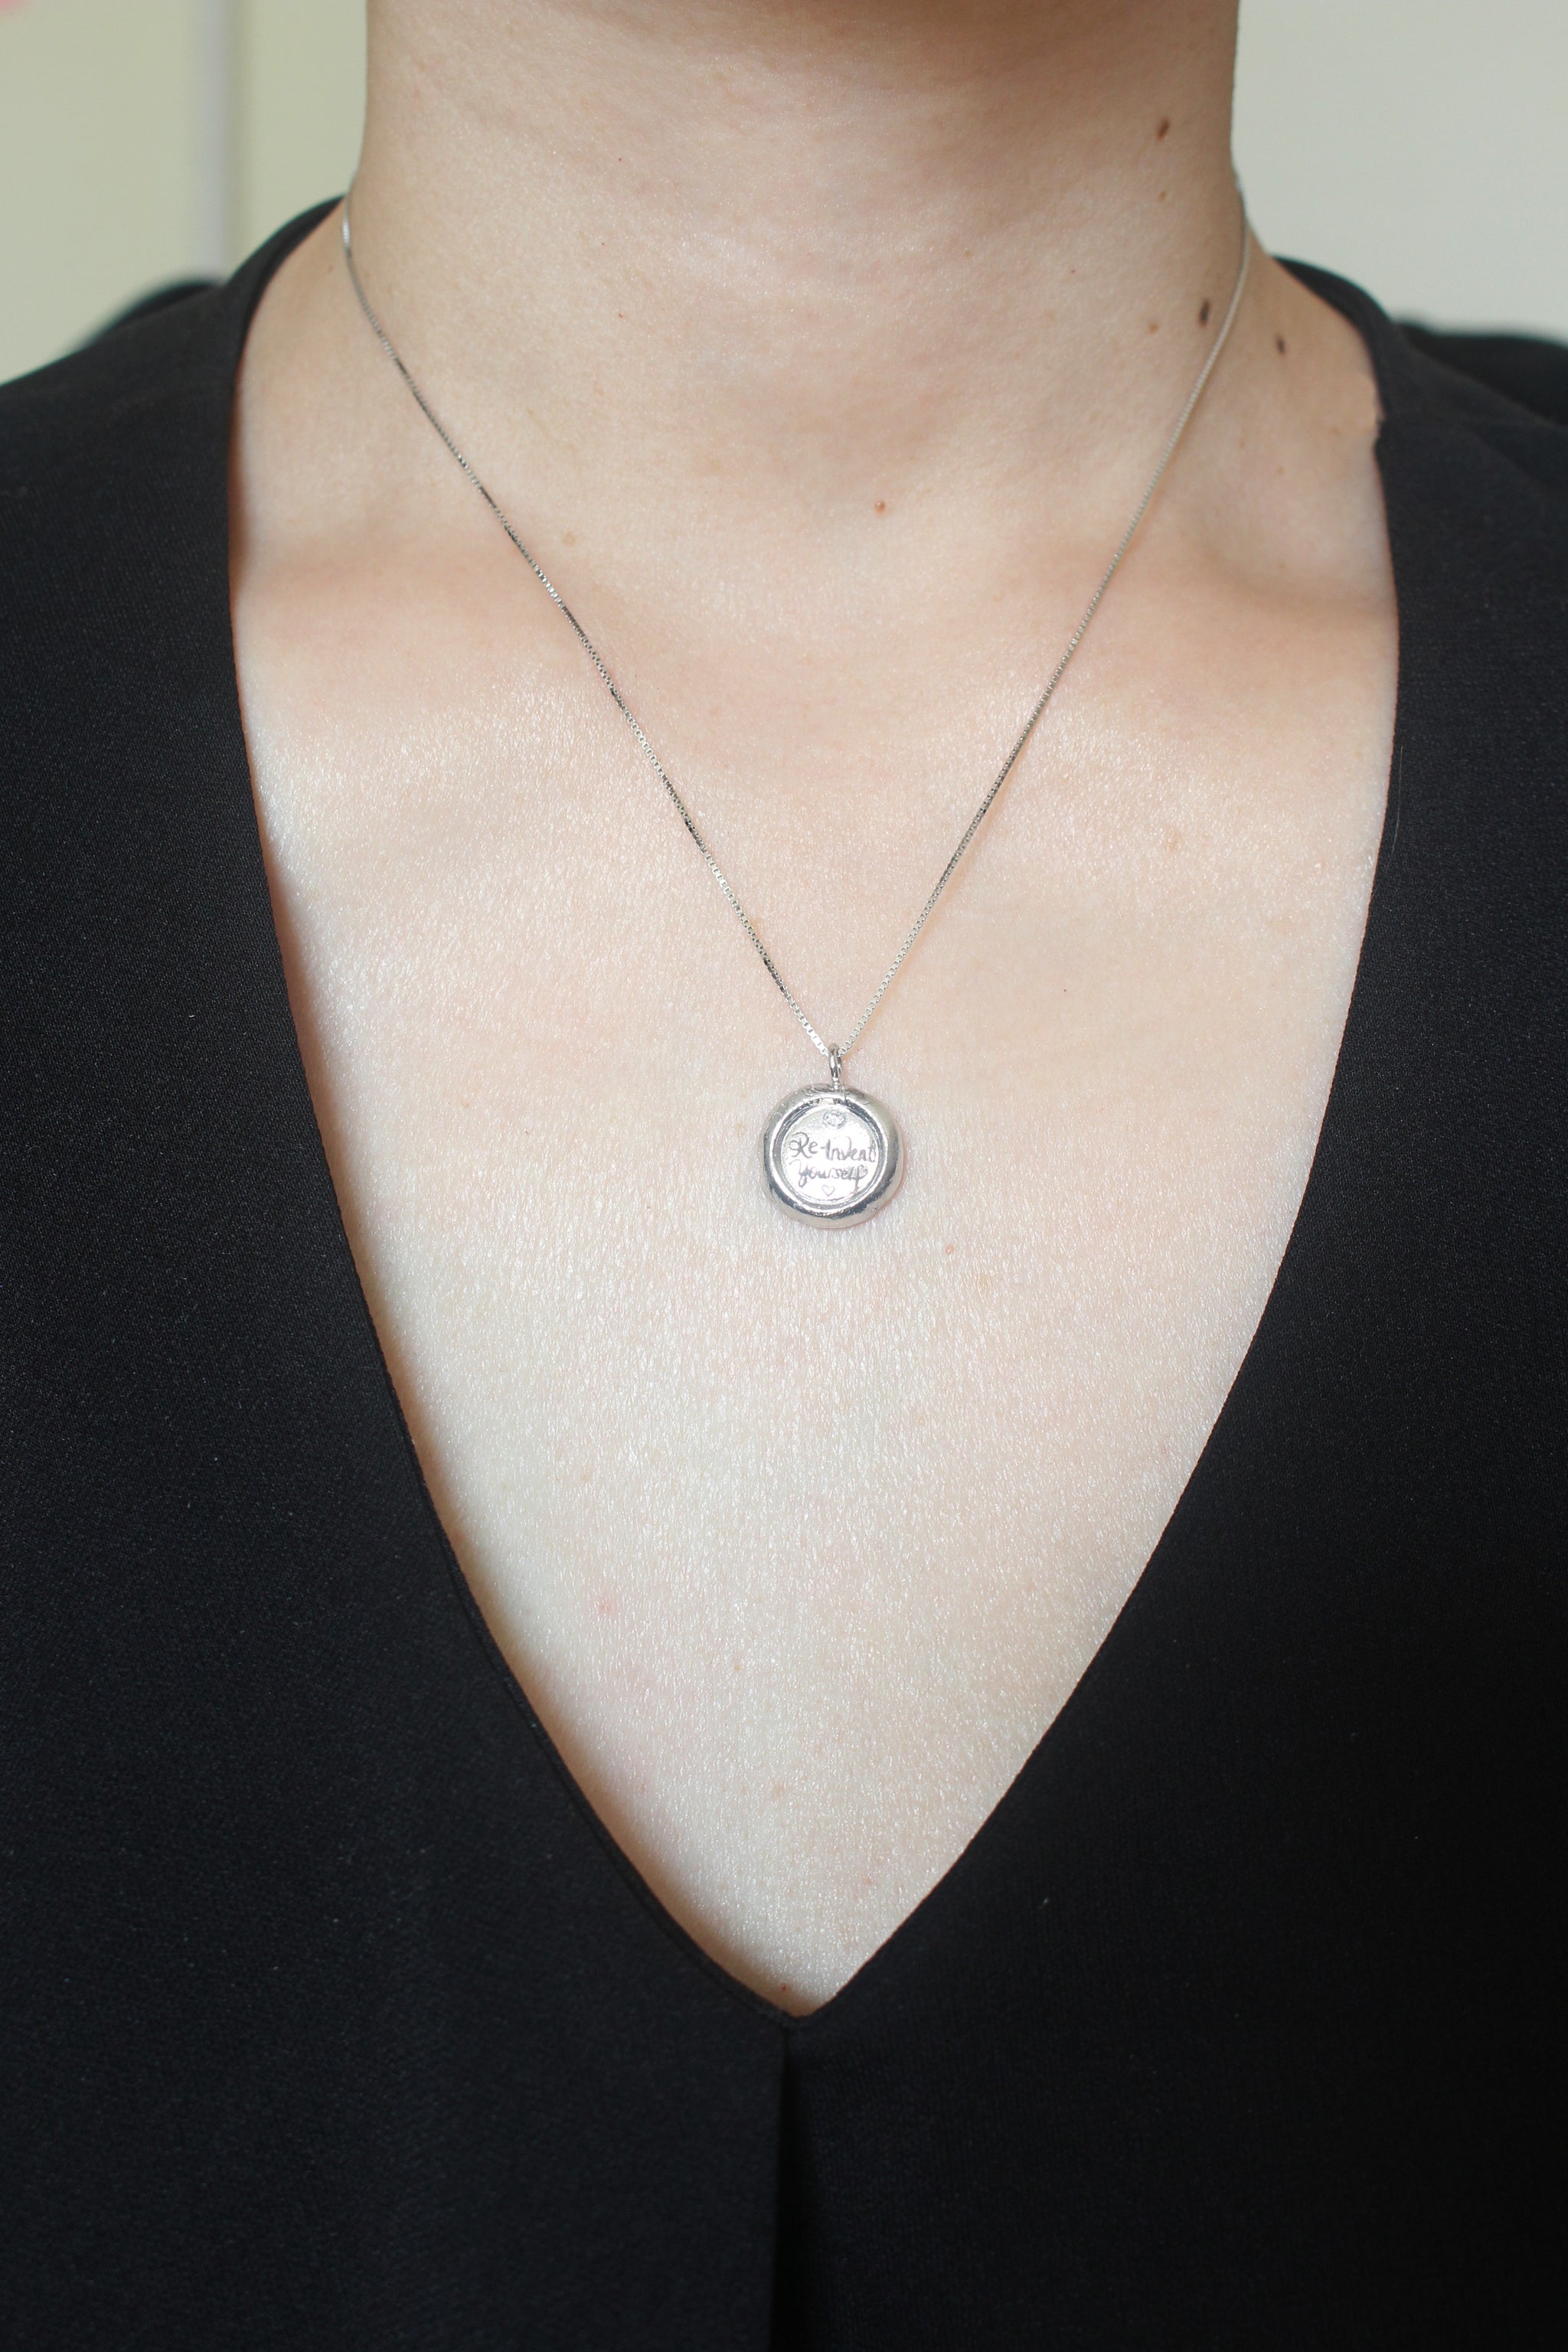 Strength Comes From Within - Empowerment Diamond Silver Necklace